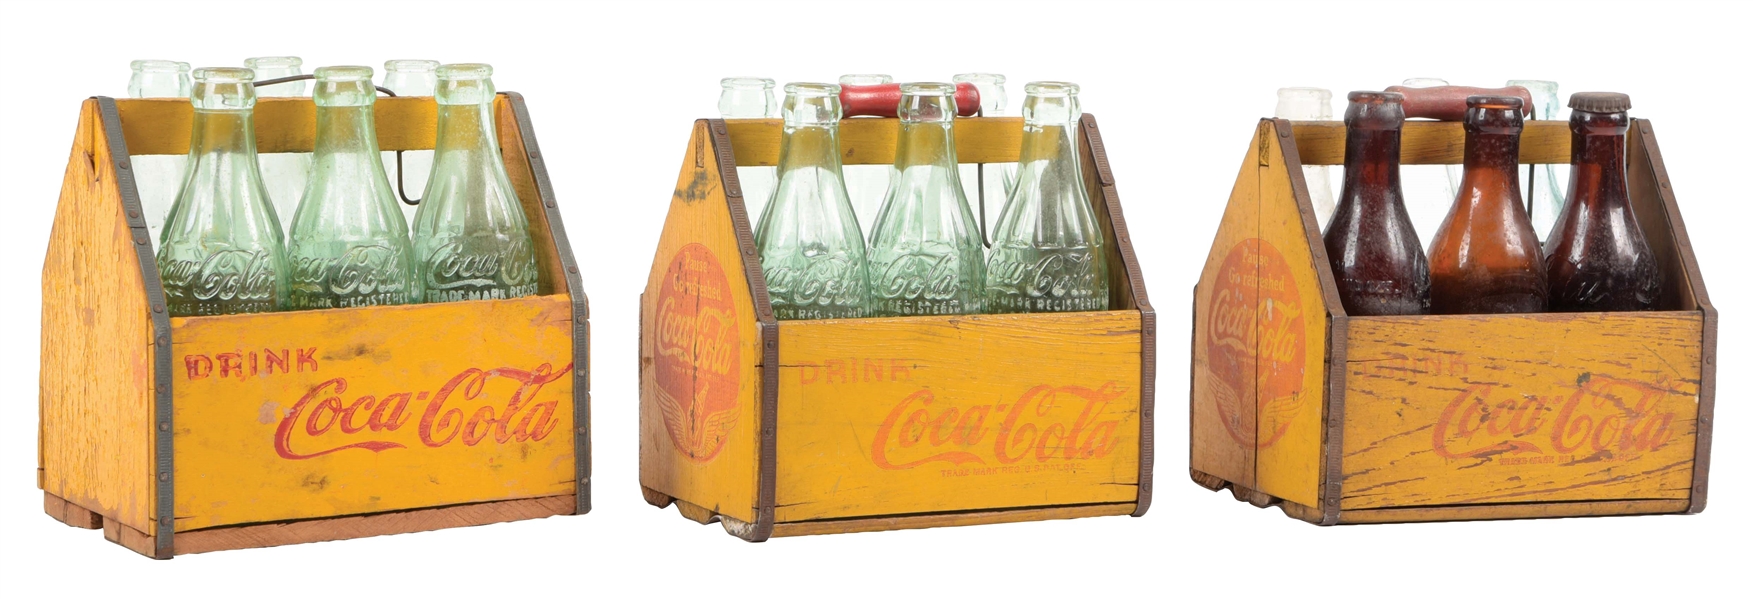 COLLECCTION OF 3 COCA-COLA WOODEN CARRIERS WITH GLASS BOTTLES.